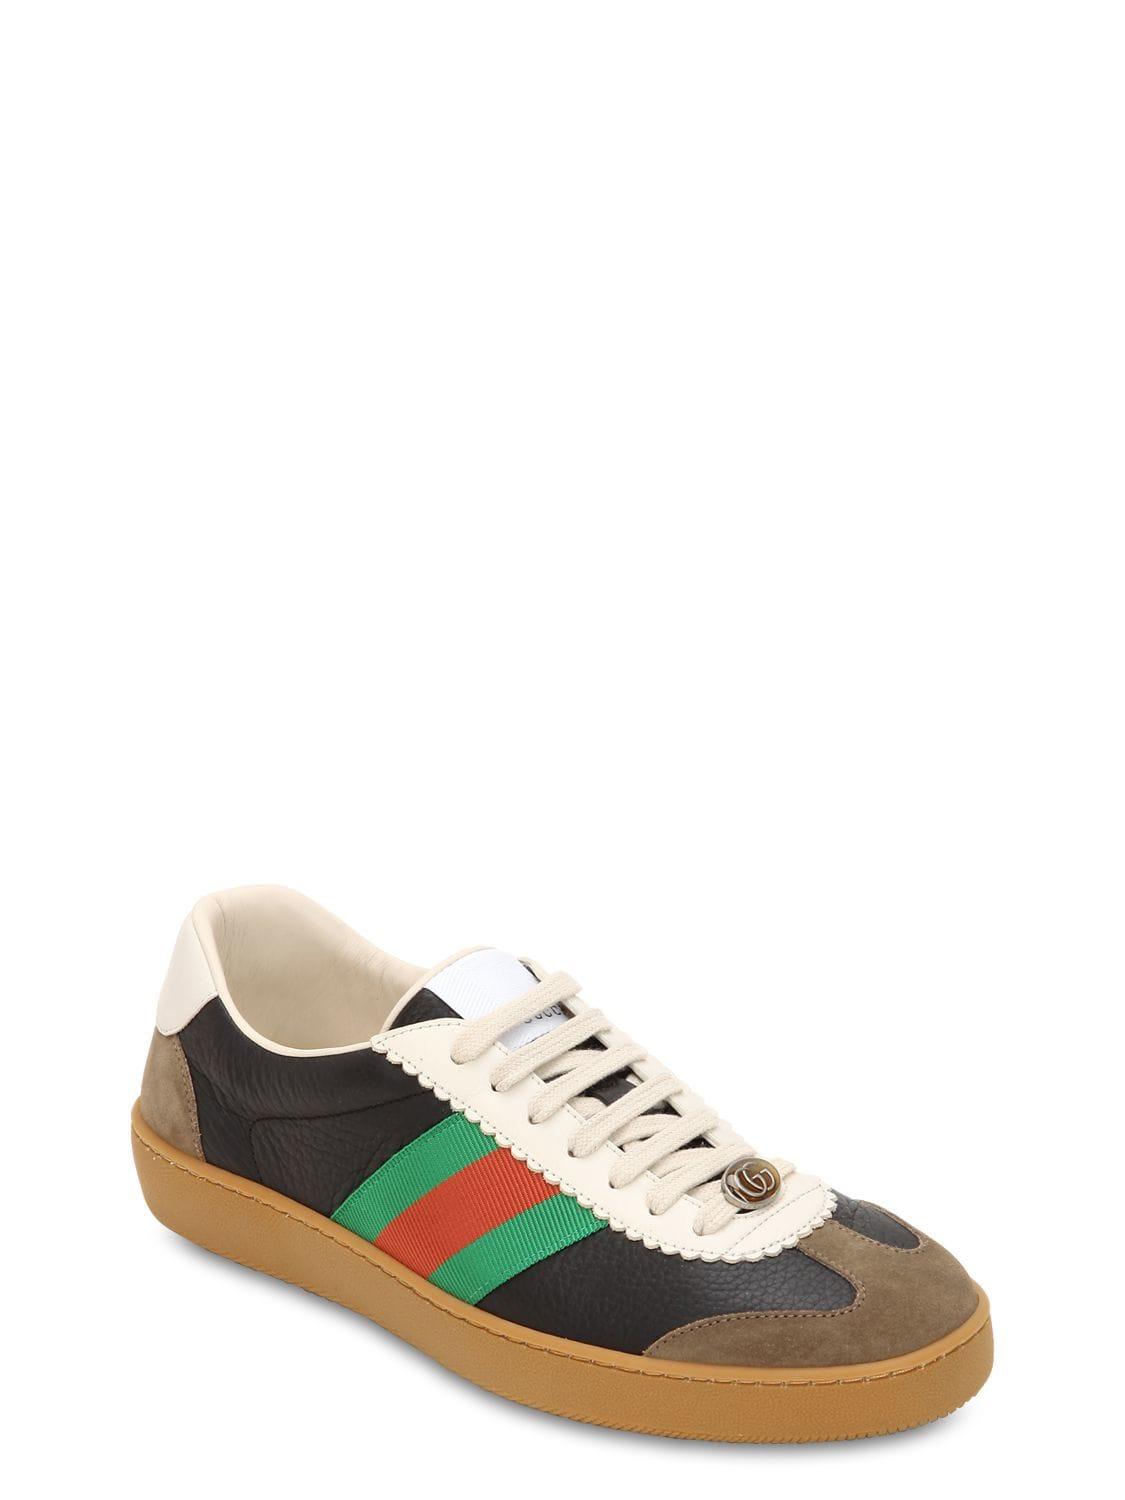 Gucci G74 Leather Sneakers W/ Web Details in Black for Men - Lyst